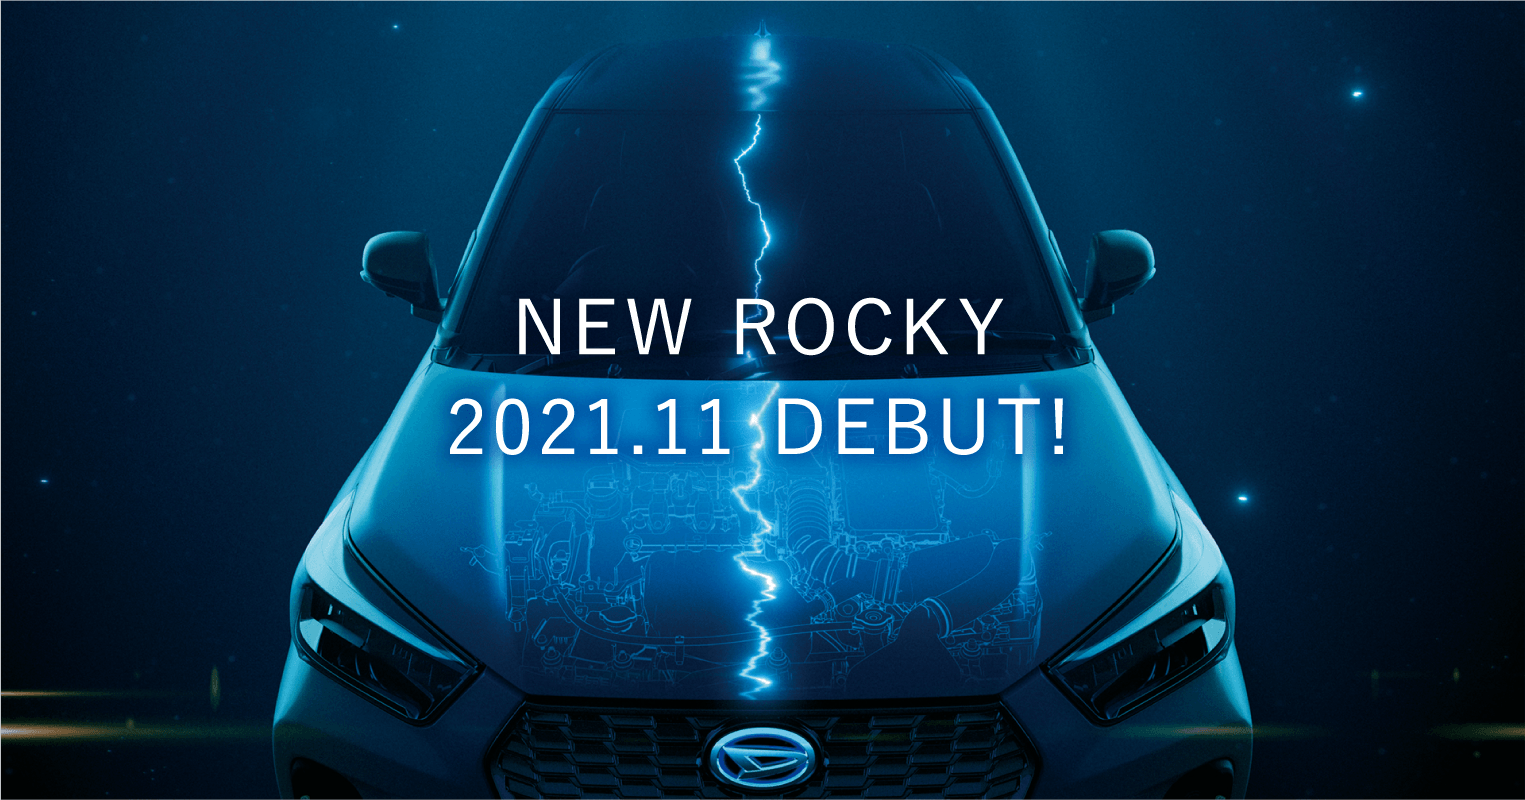 NEW ROCKY 2021.11 DEBUT!